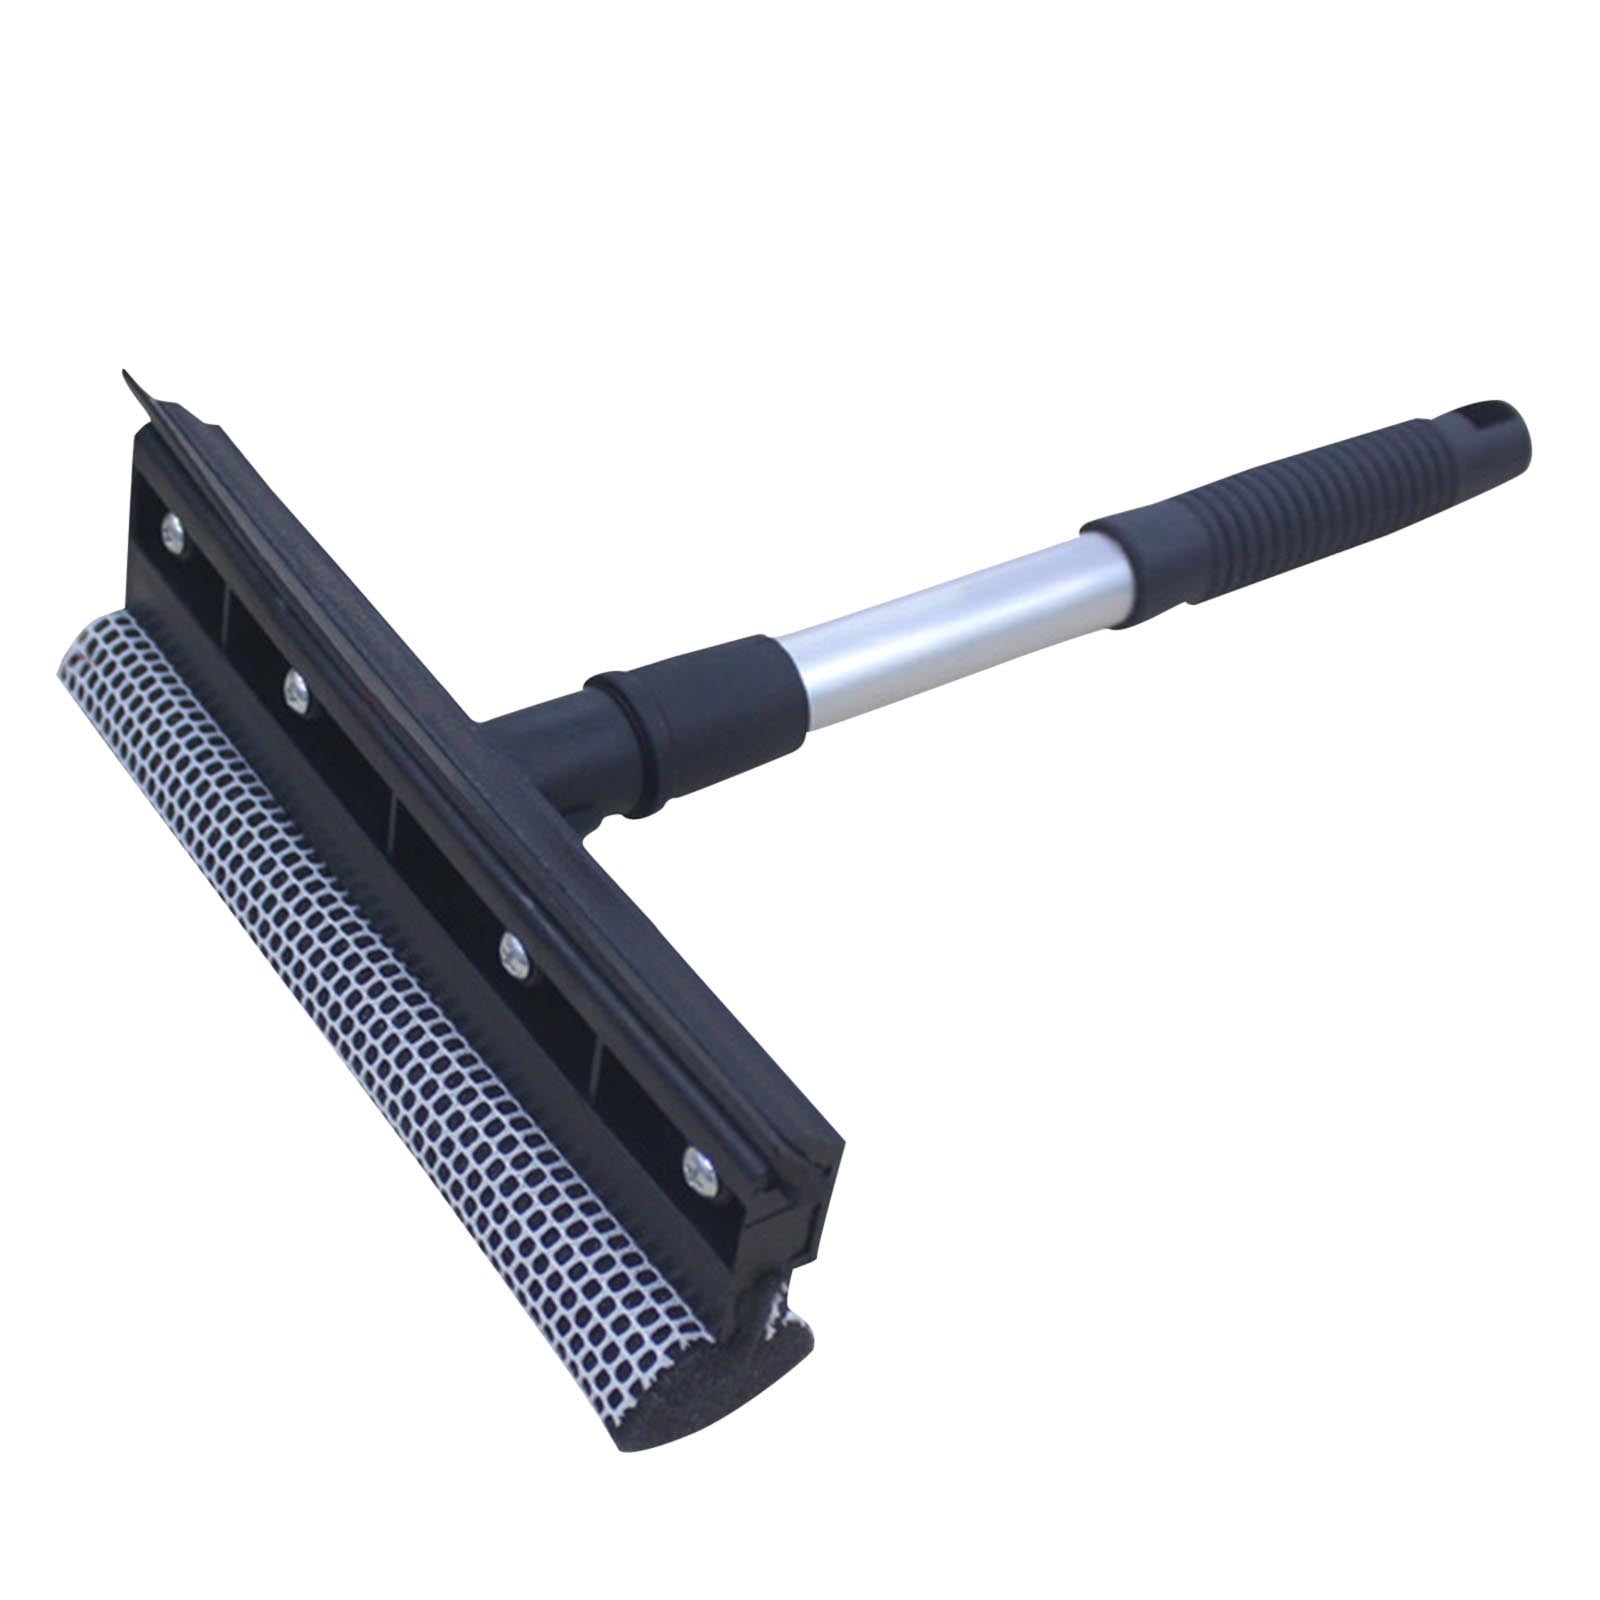 Muling Window Squeegee Cleaning Tool Window Cleaner Car Squeegee Windshield Cleaning Sponge and Rubber Squeegee BlackM